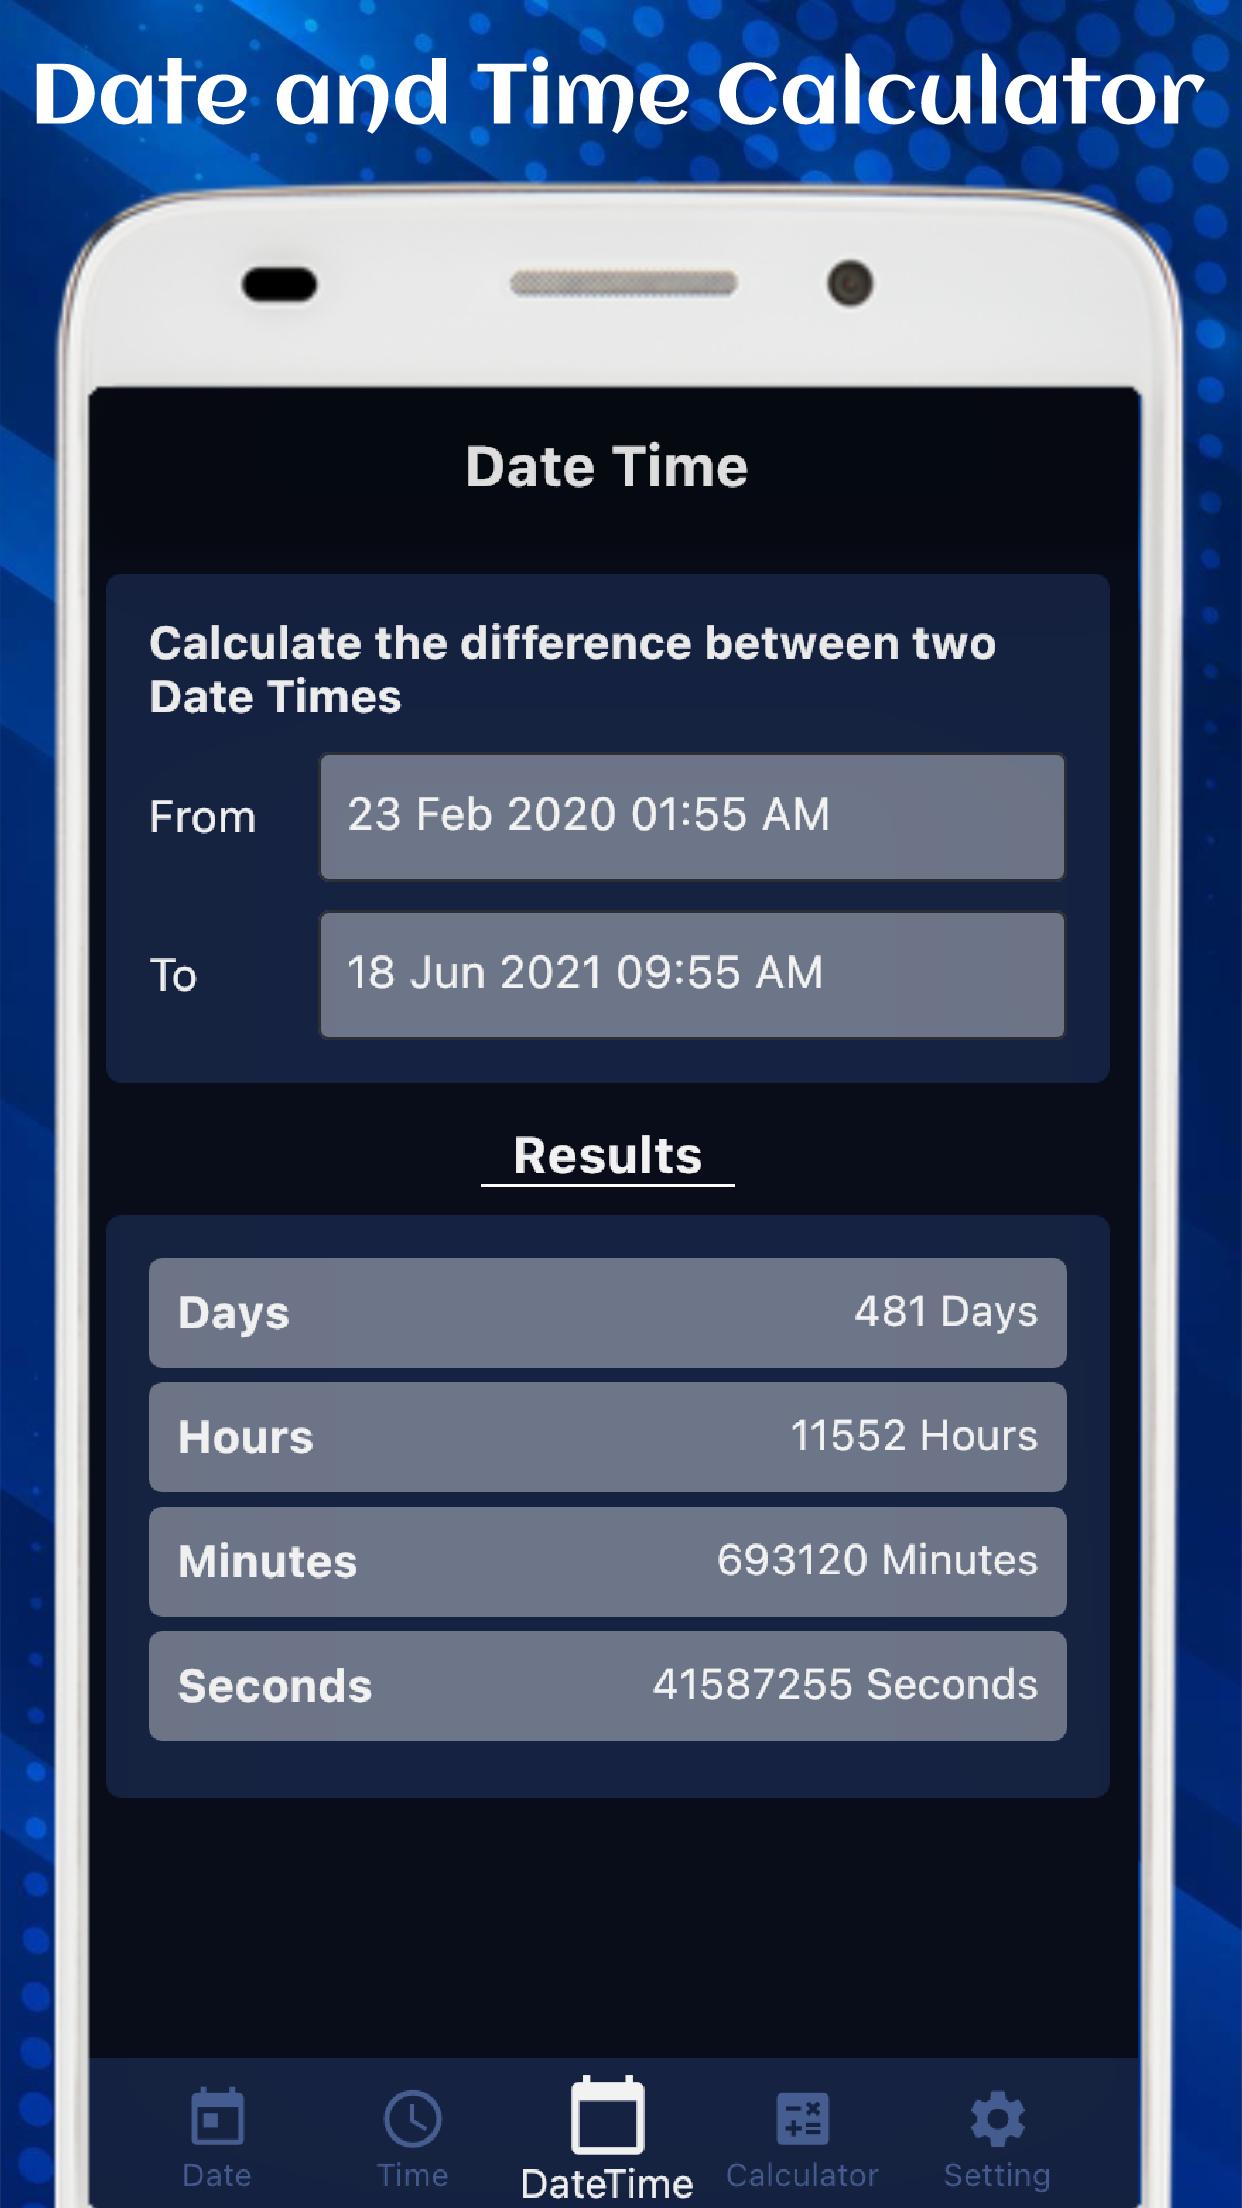 Download do APK de Date and Time Calculator para Android